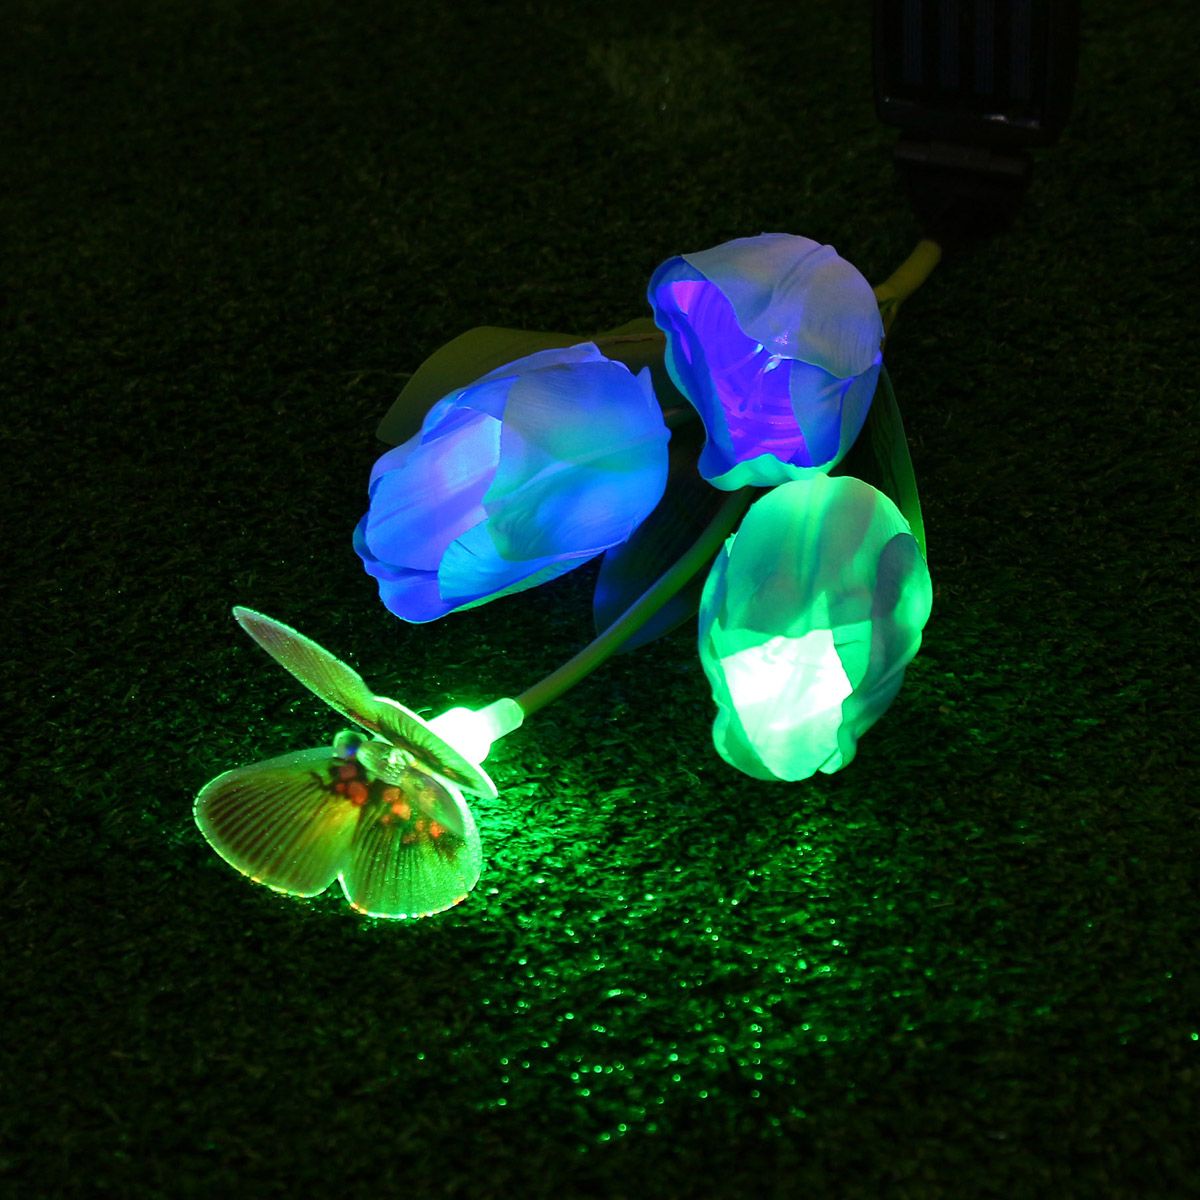 1PC2PCS-Solar-Powered-LED-Lawn-Light-Colorful-Flower-Tulip-Outdoor-Yard-Garden-Lamp-for-Outdoor-Home-1722987